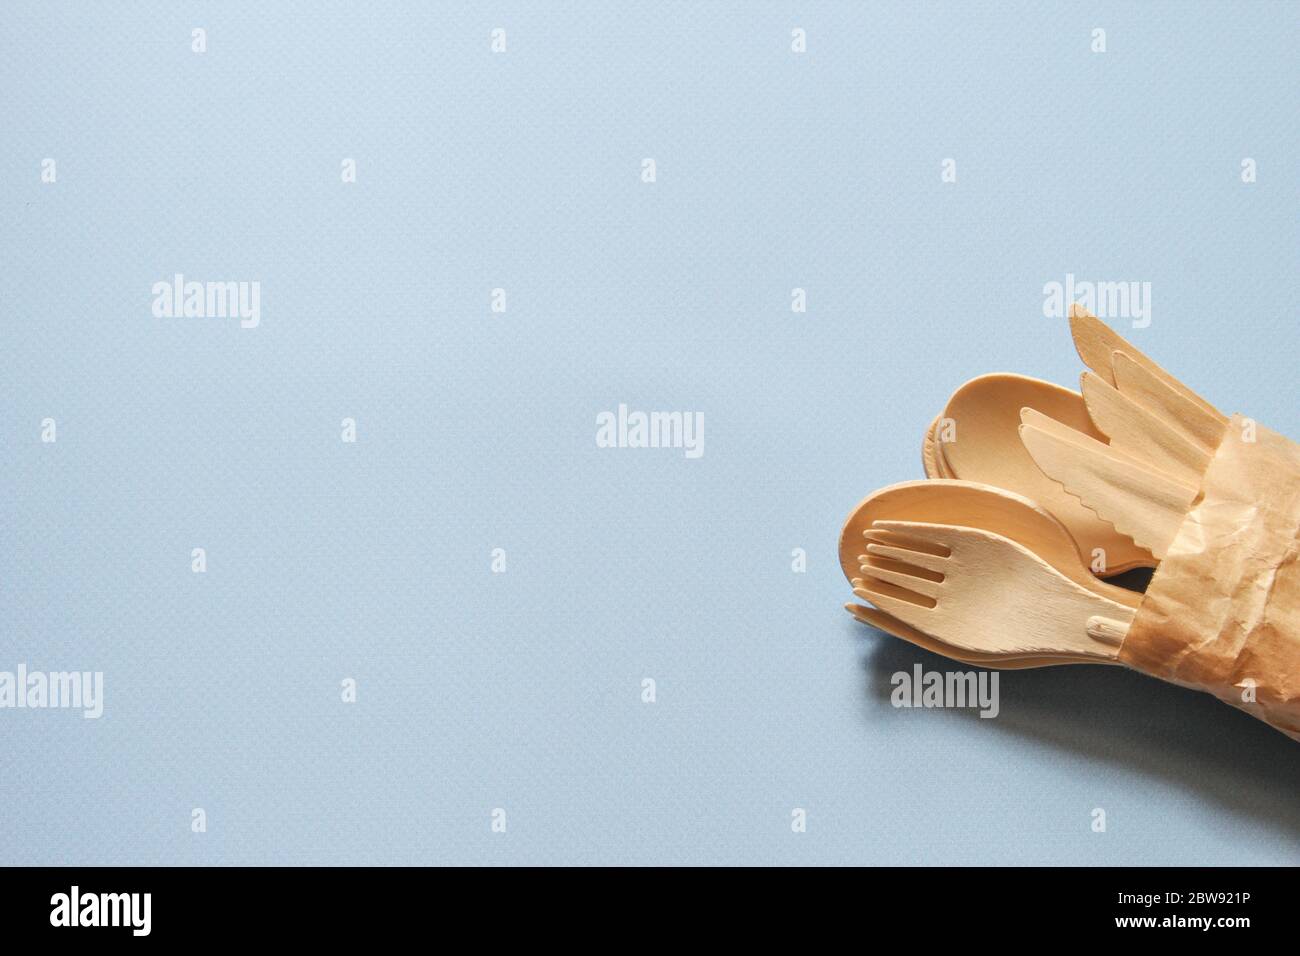 Spoons, forks, knives made of wood. Eco-friendly tableware. Stock Photo